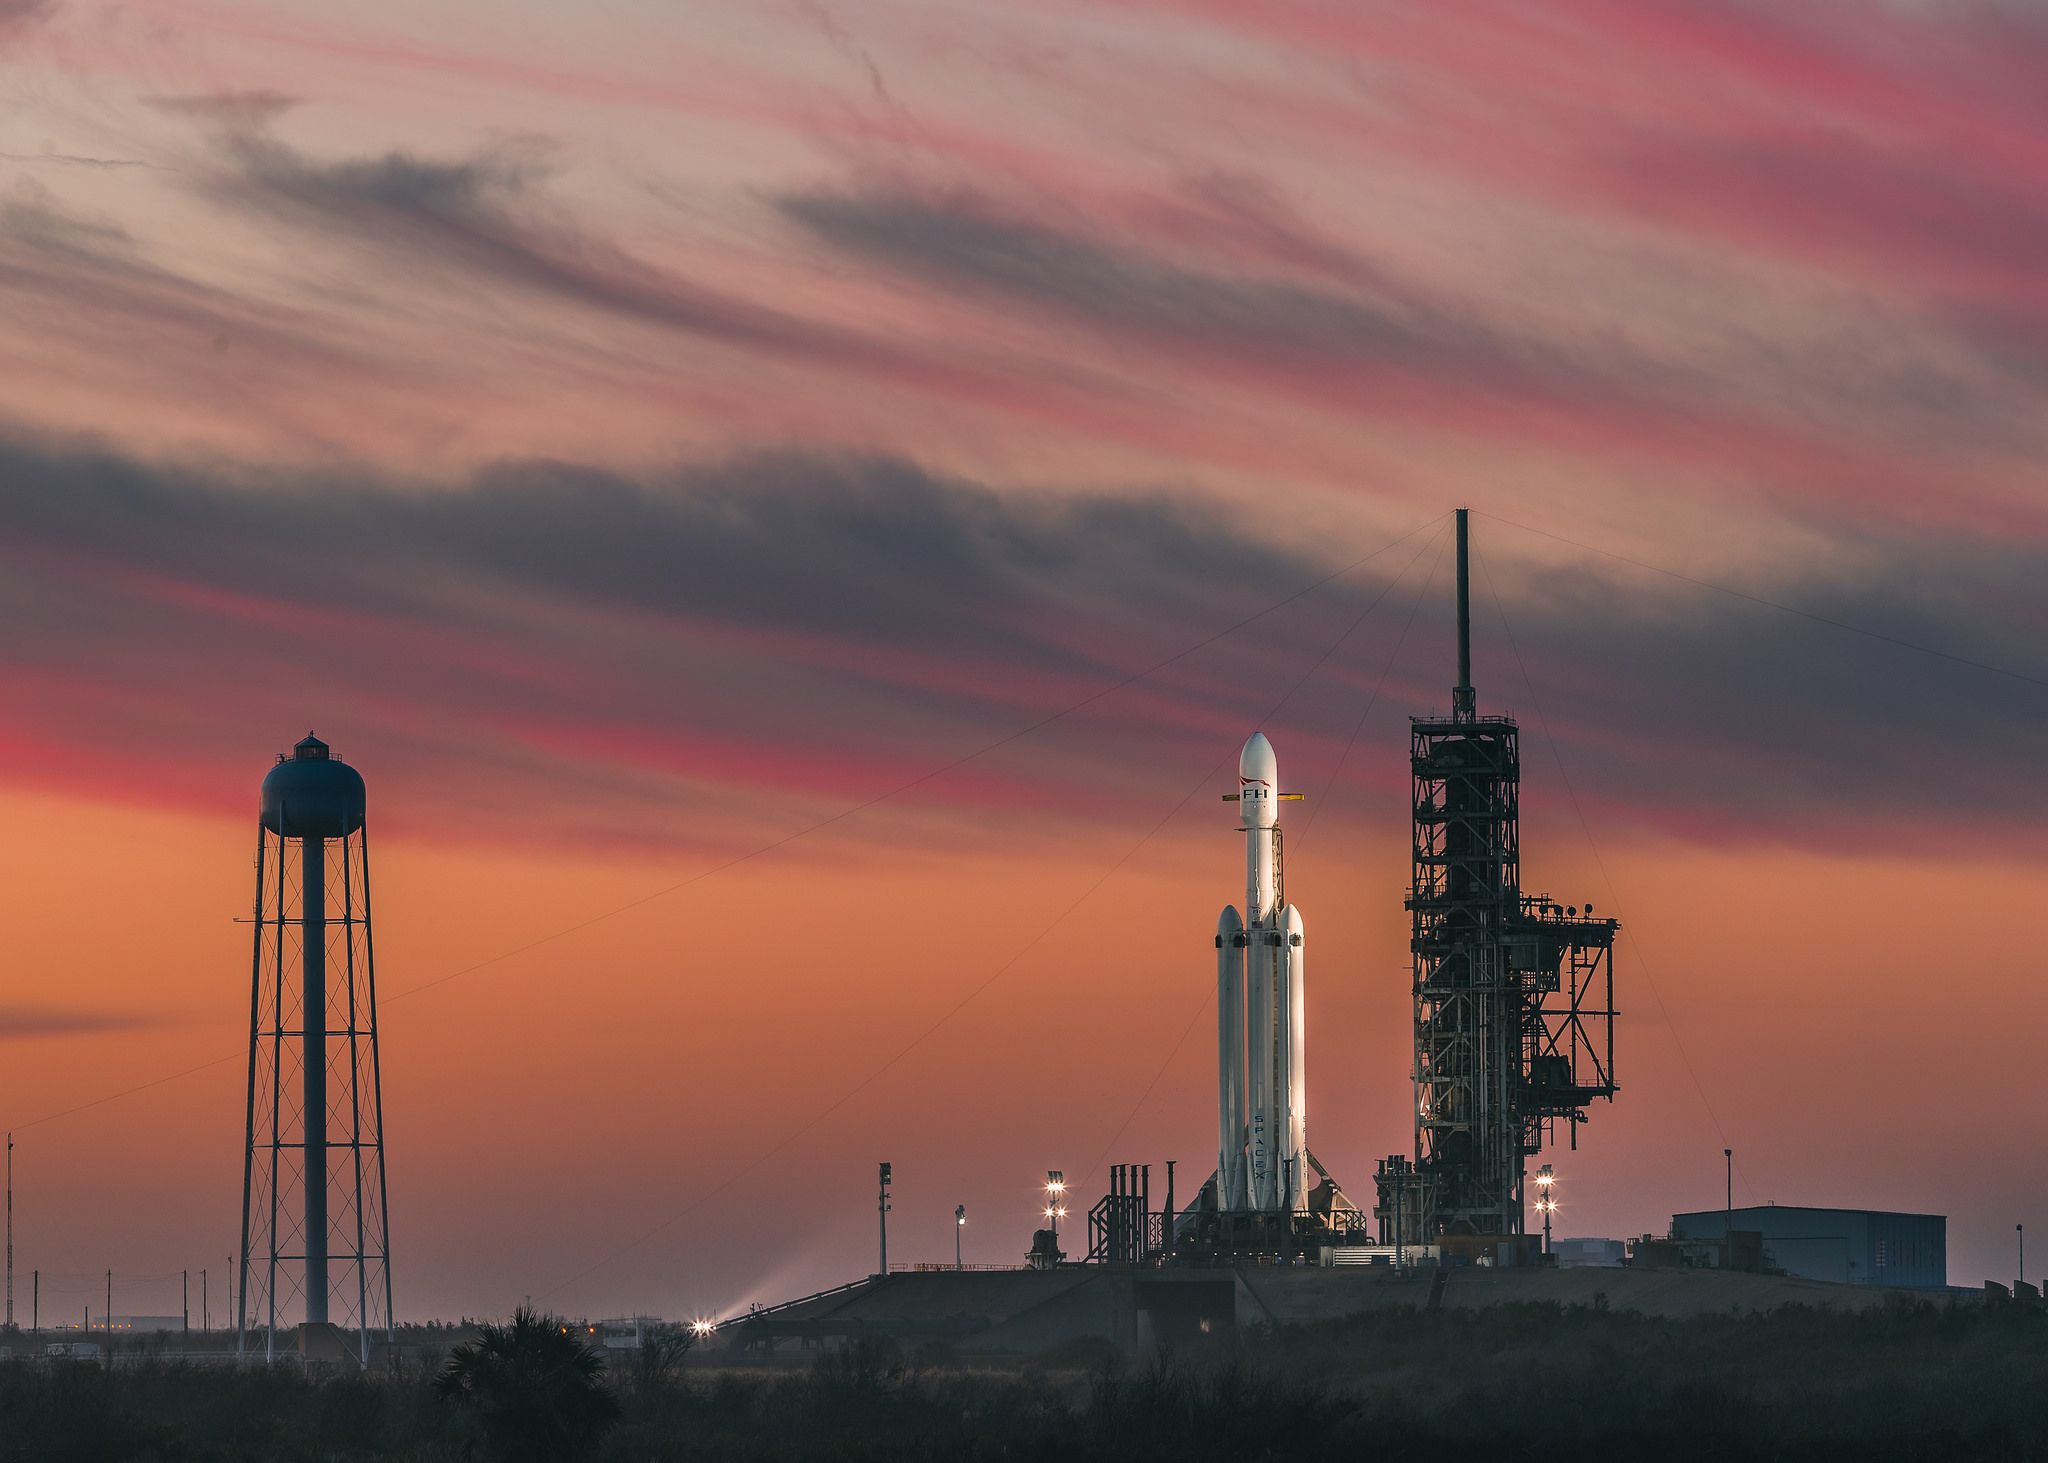 spacex falcon heavy on launch pad